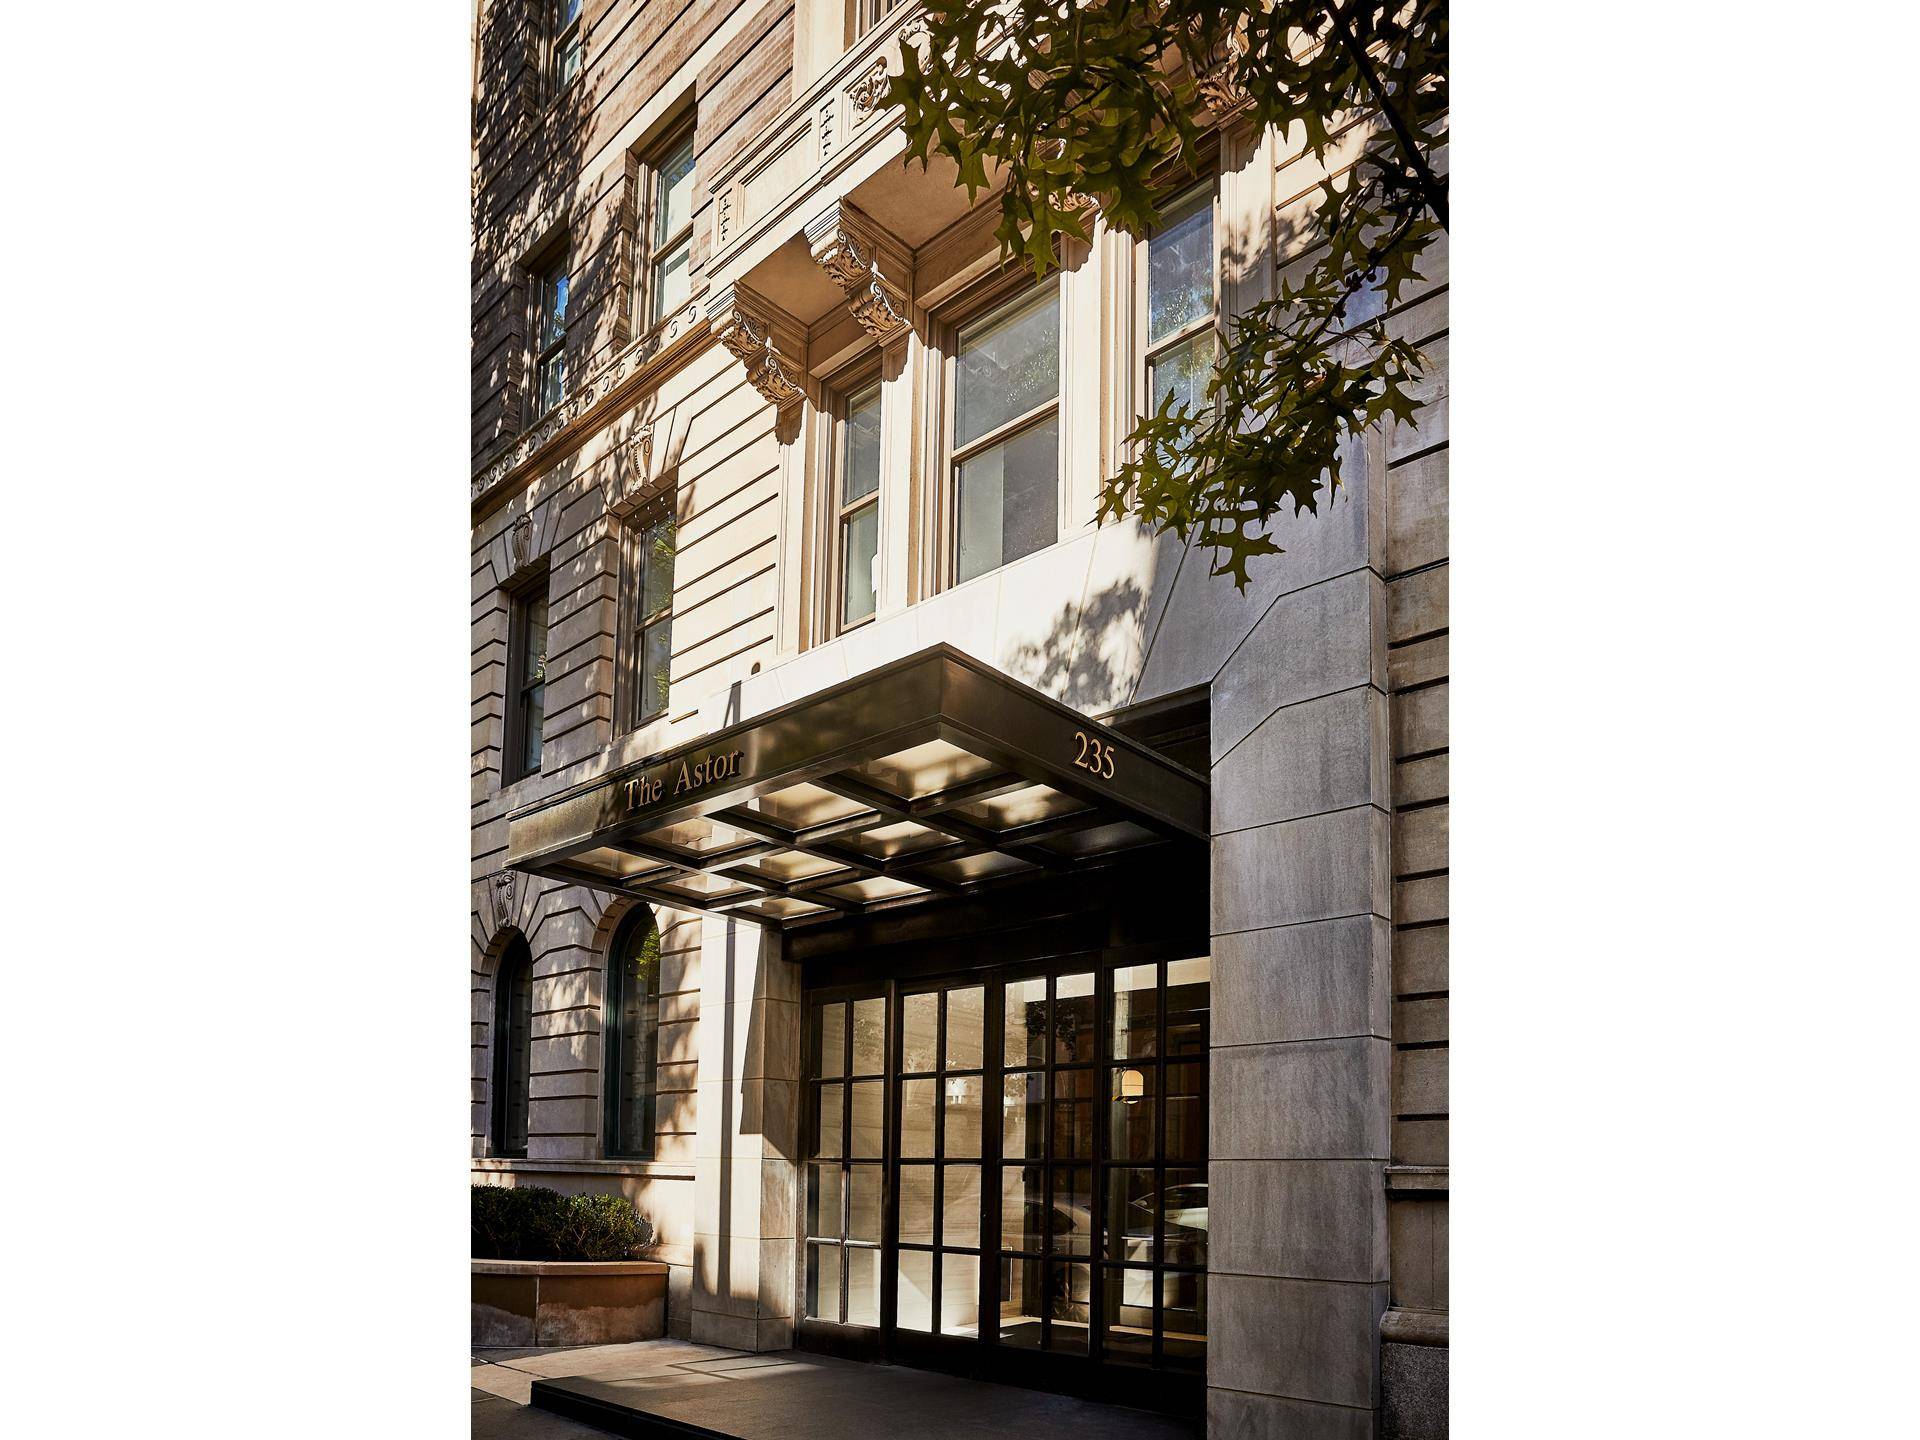 Welcome to The Astor. Experience an exquisite arrival as you discreetly enter off Broadway through bronze and glass doors and into the renovated historic lobby, where carefully restored original details ...